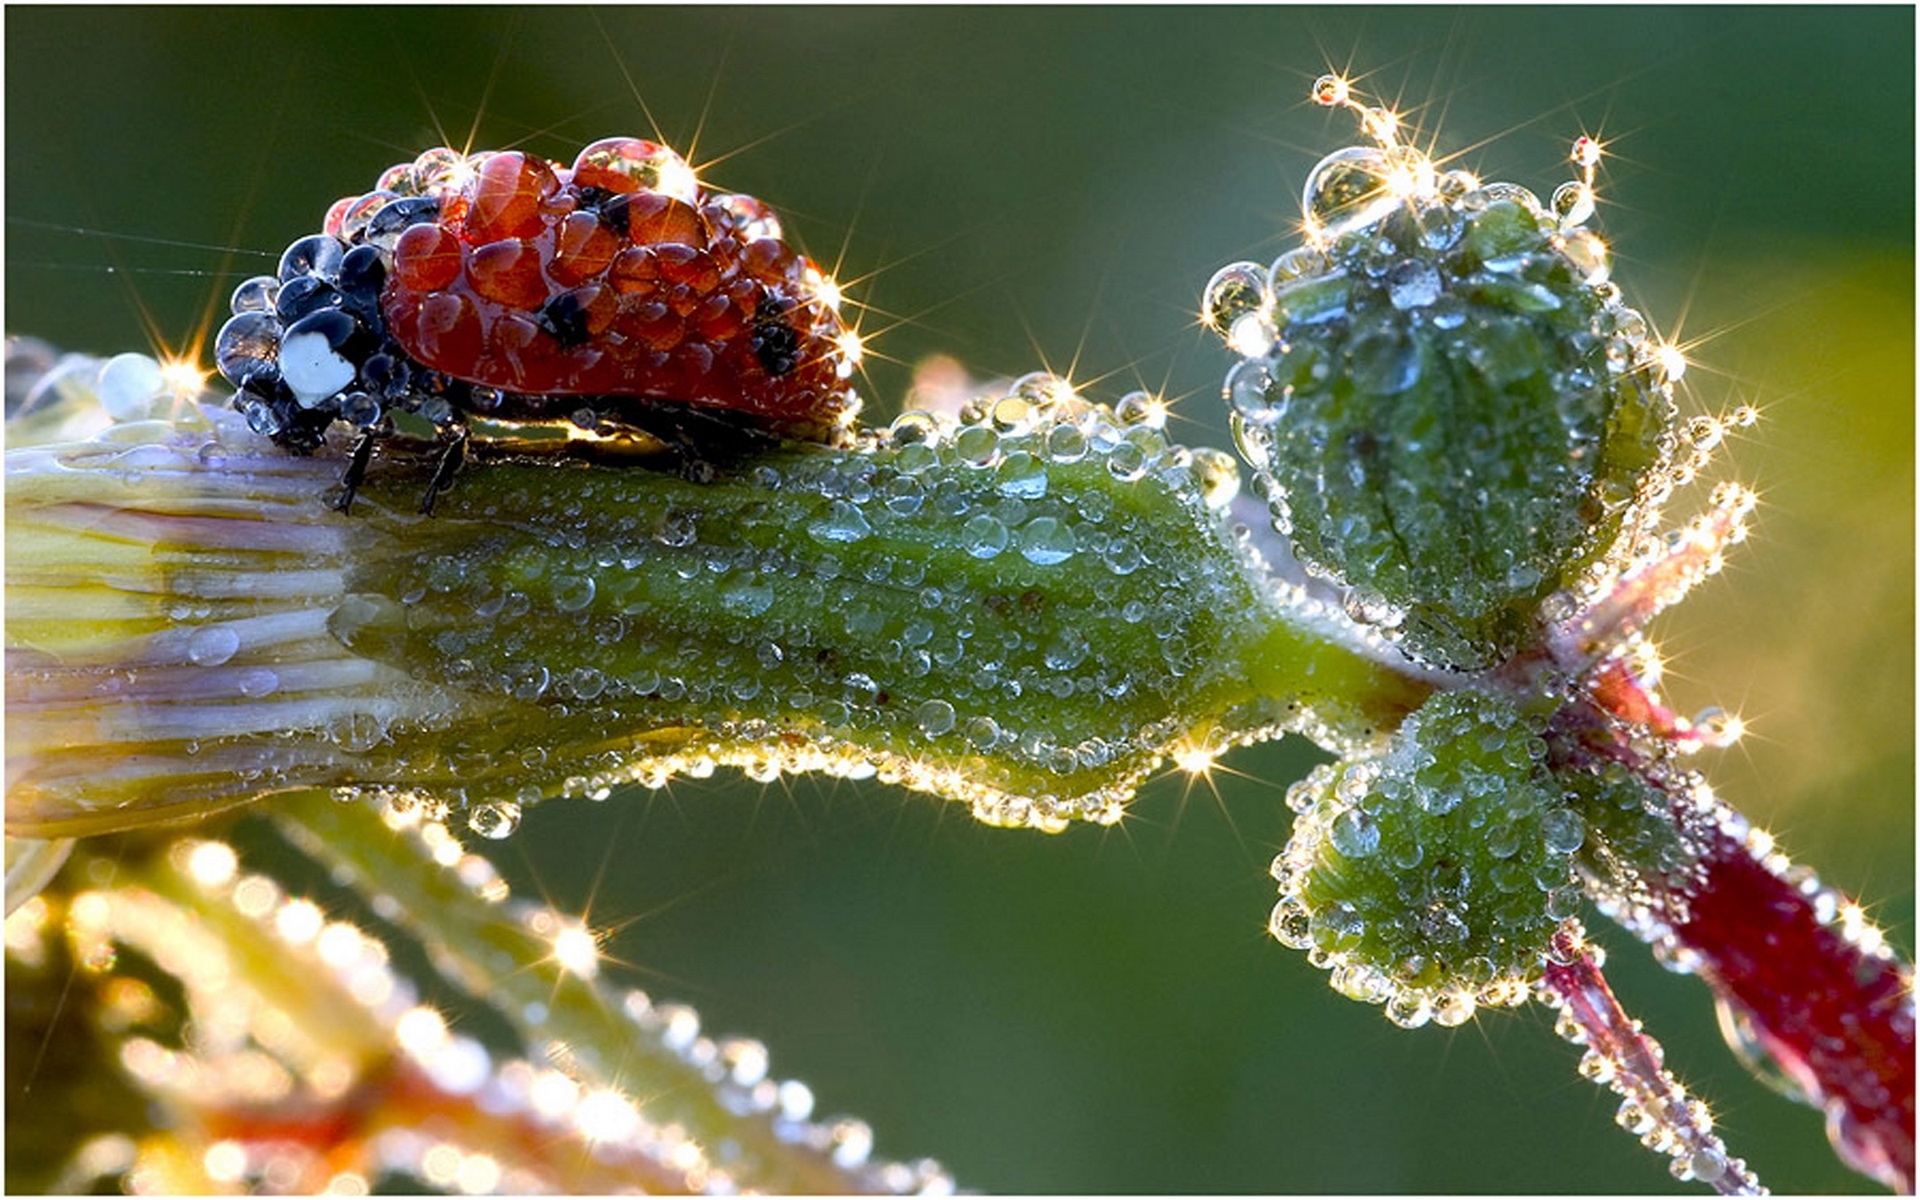 drops, insects, ladybugs, green